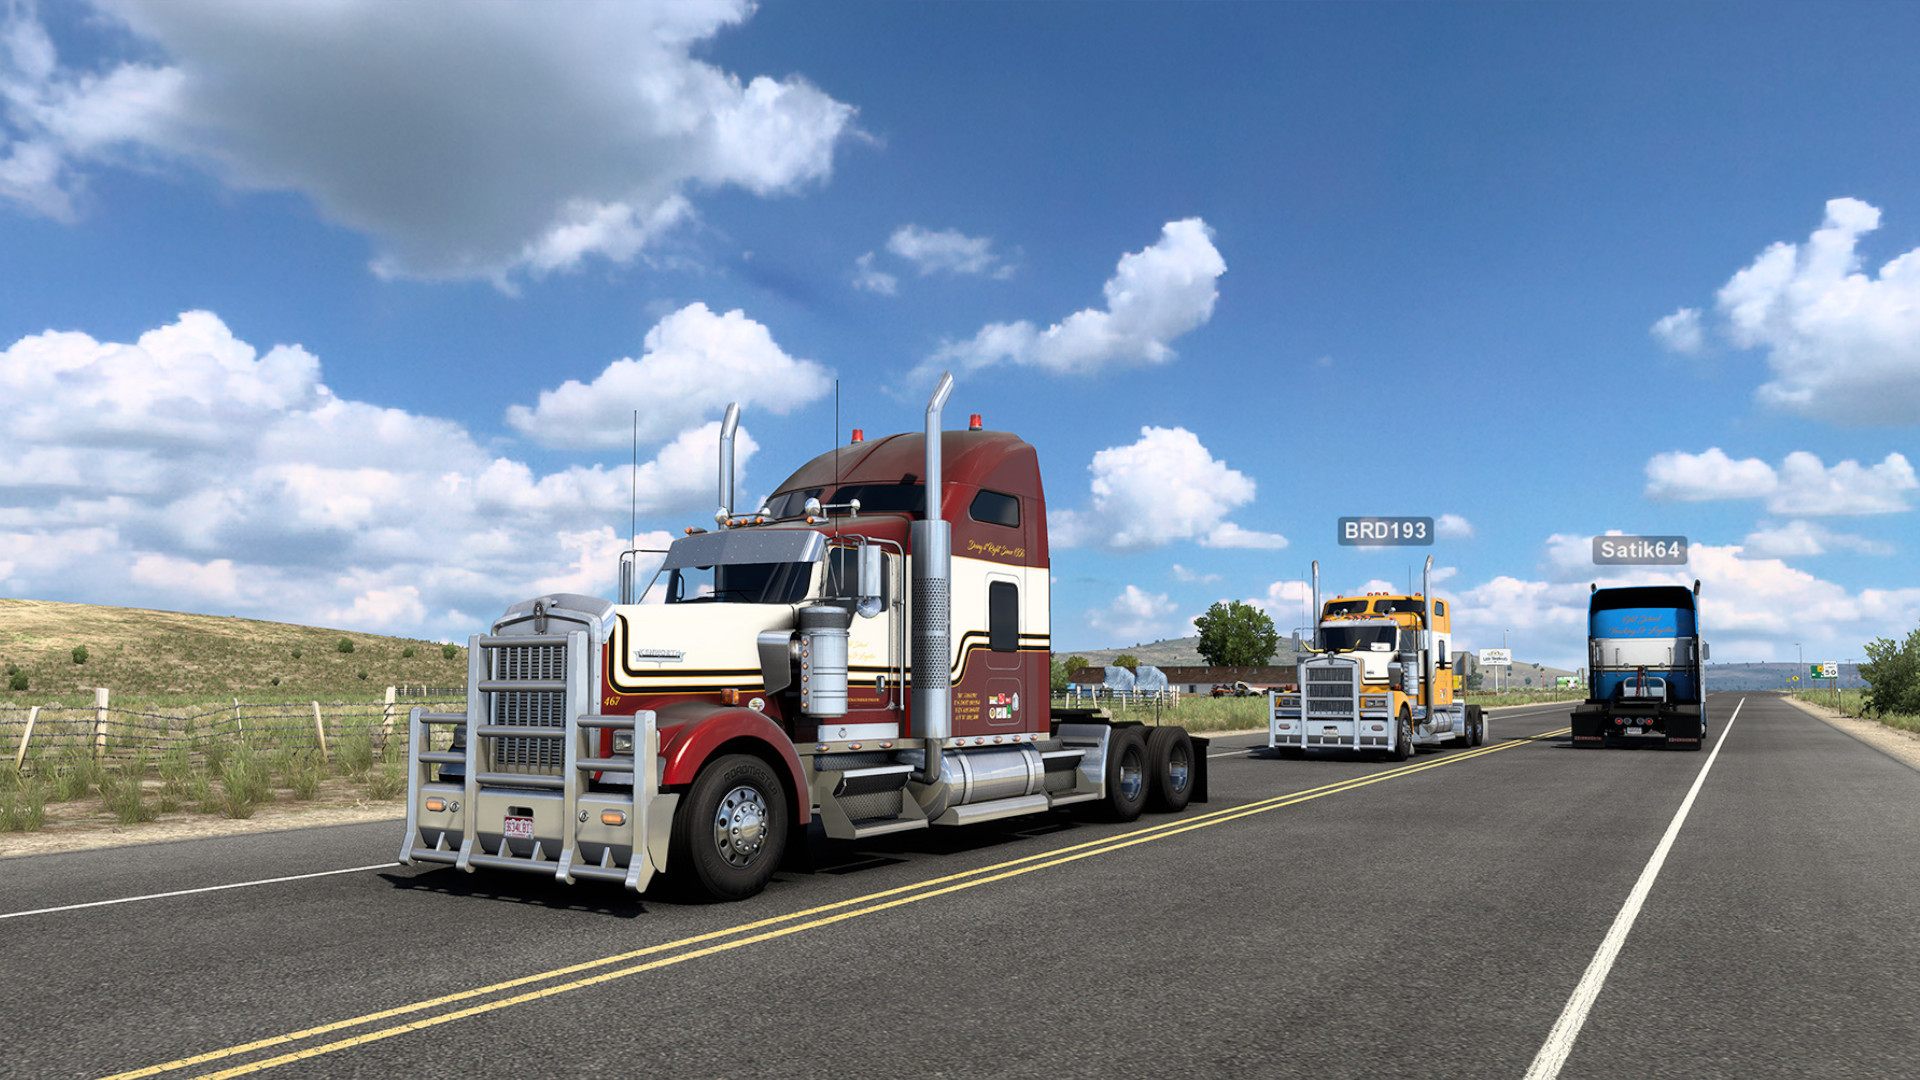 Euro Truck Simulator 2 and ATS are both getting multiplayer mod support